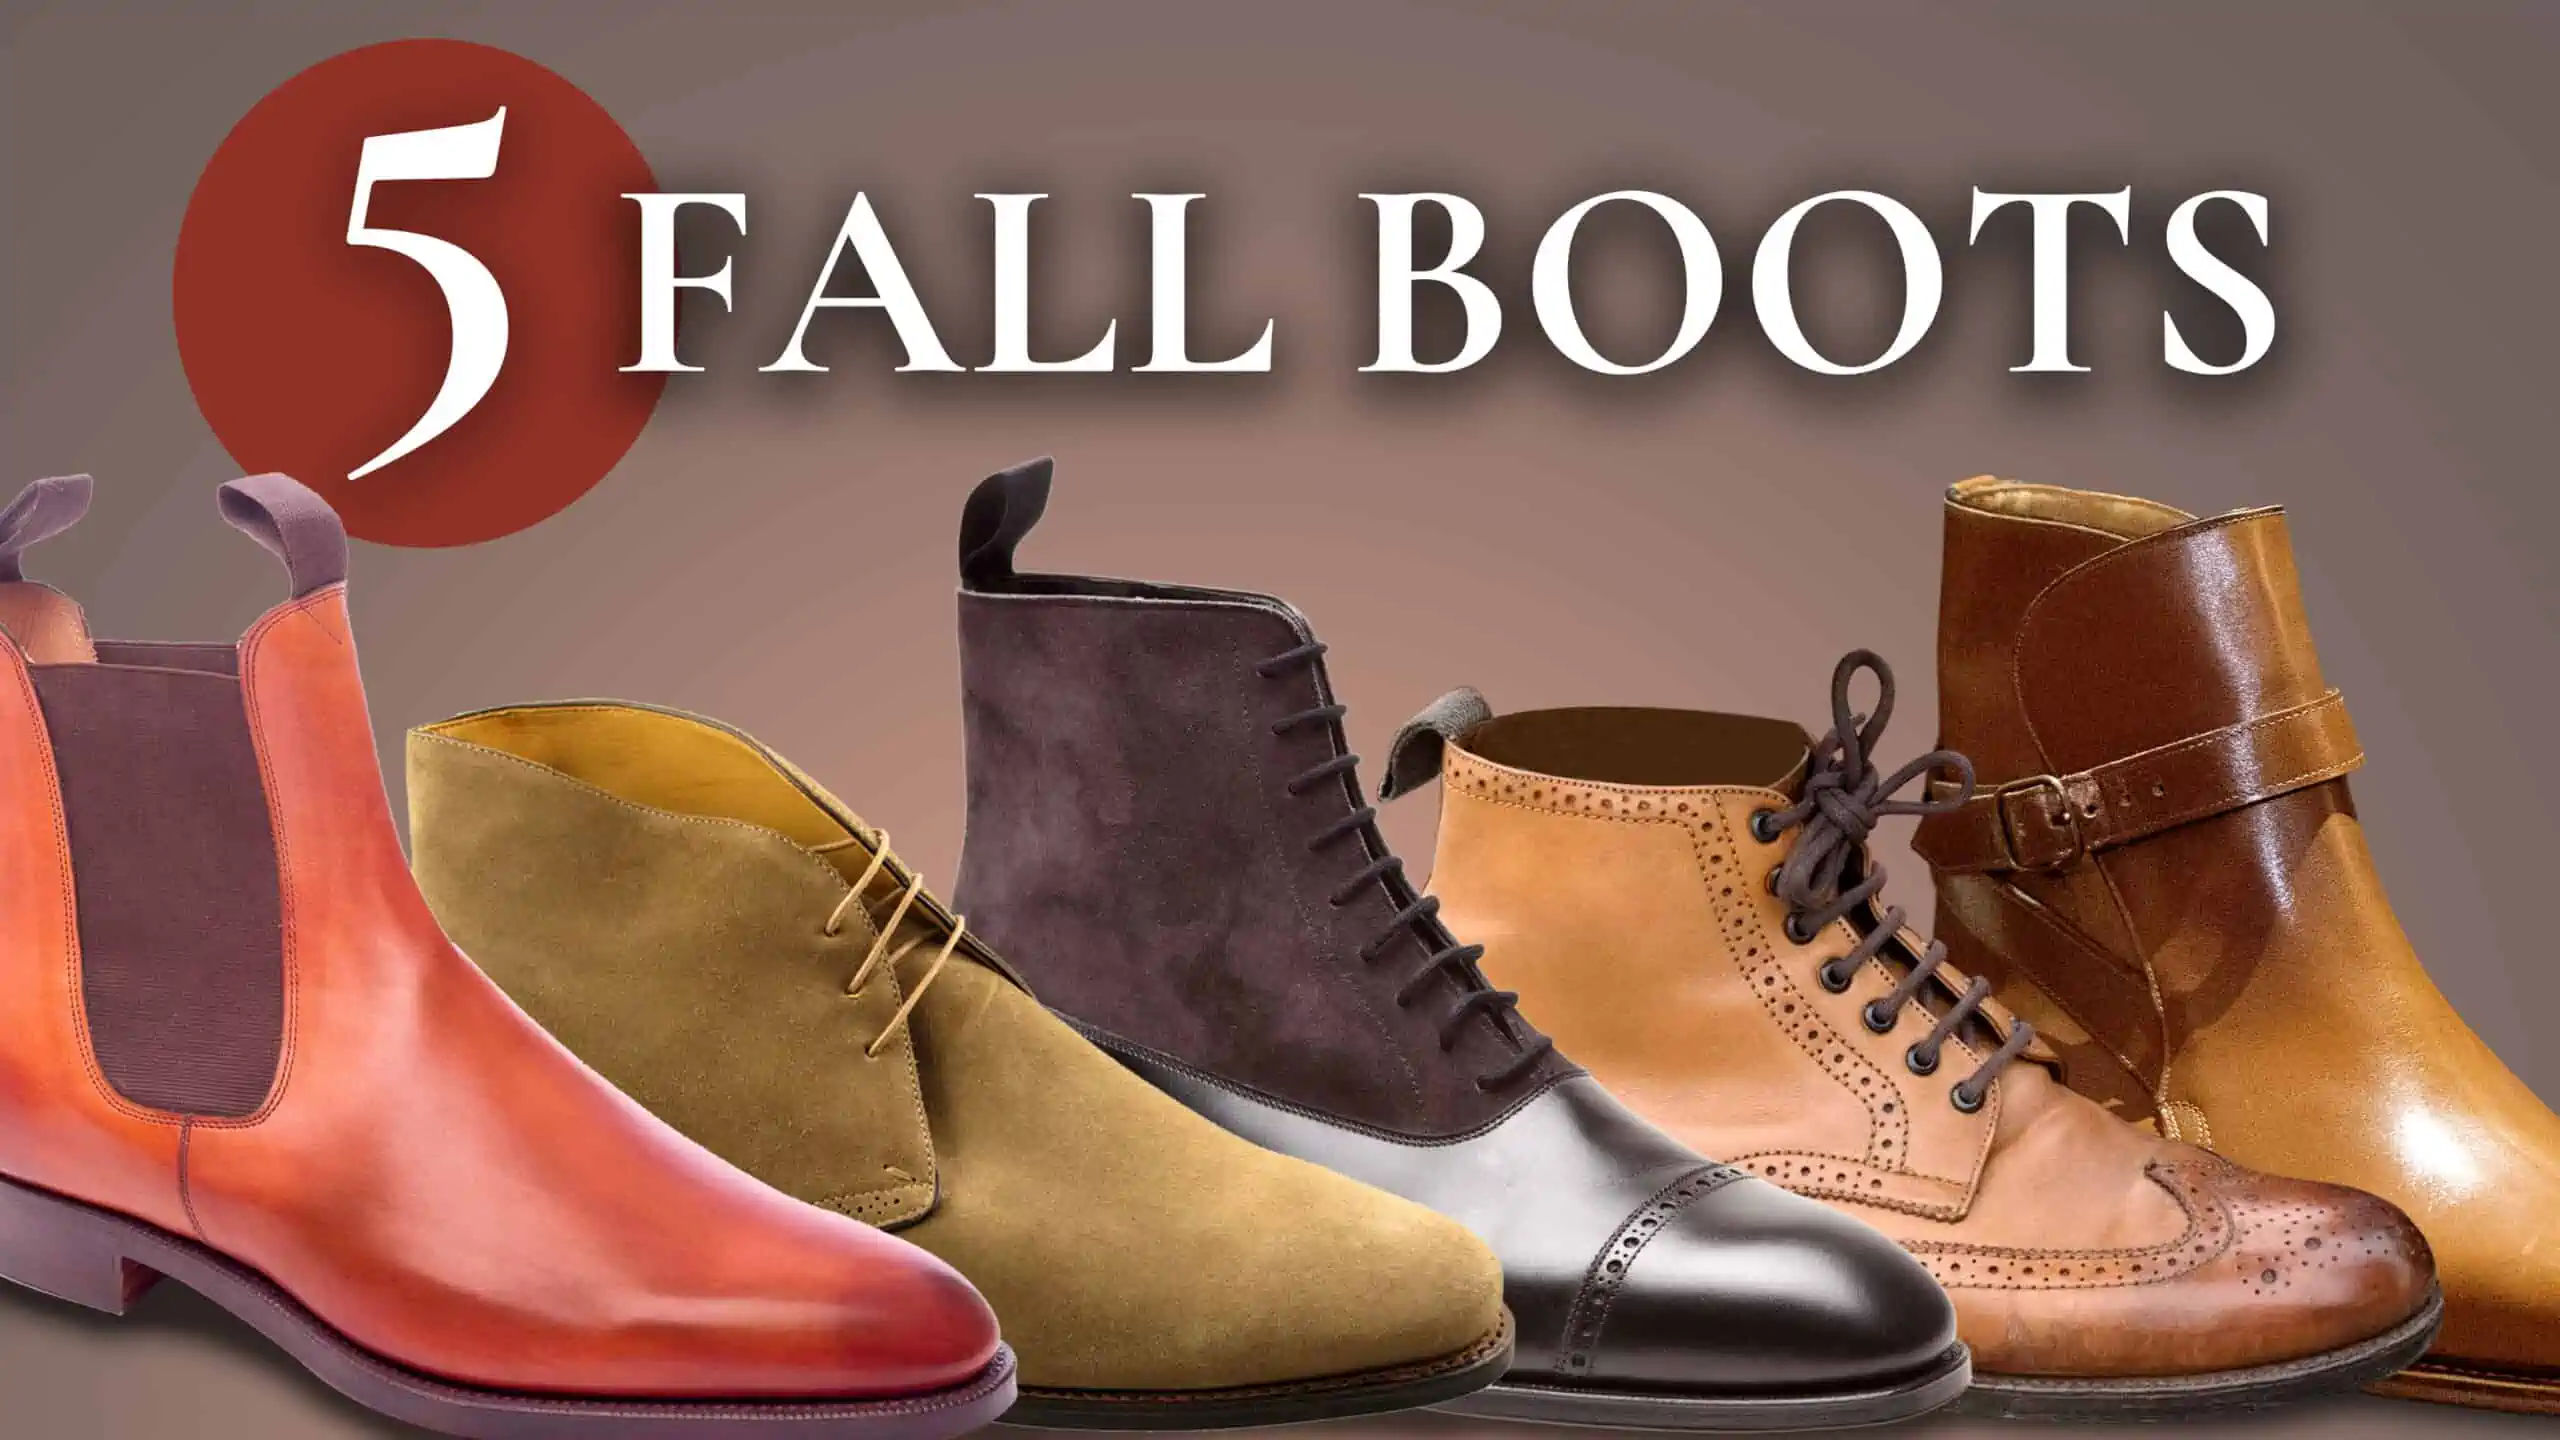 11 Target shoes to shop this fall Boots sneakers and more